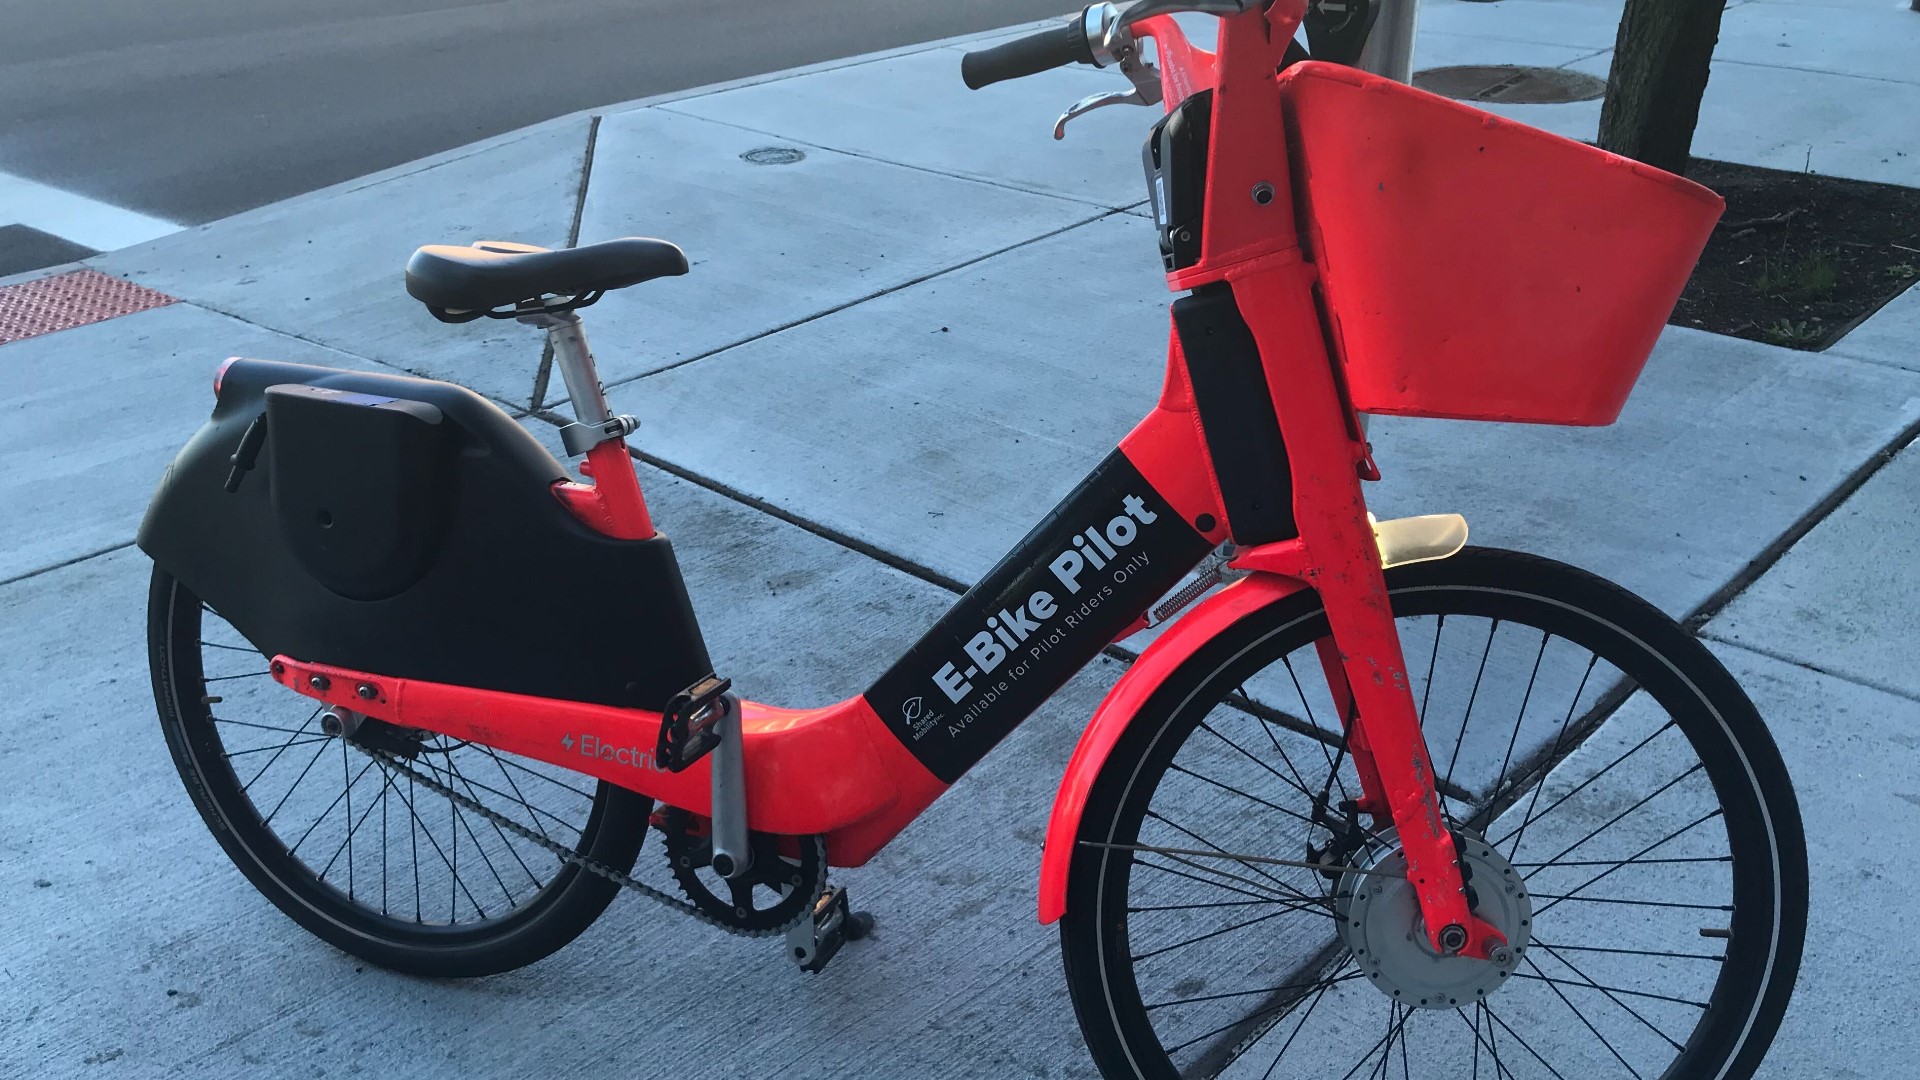 Local non-profit Shared Mobility Inc. will test the first-of-its-kind program that will give residents access to e-bikes at no charge.